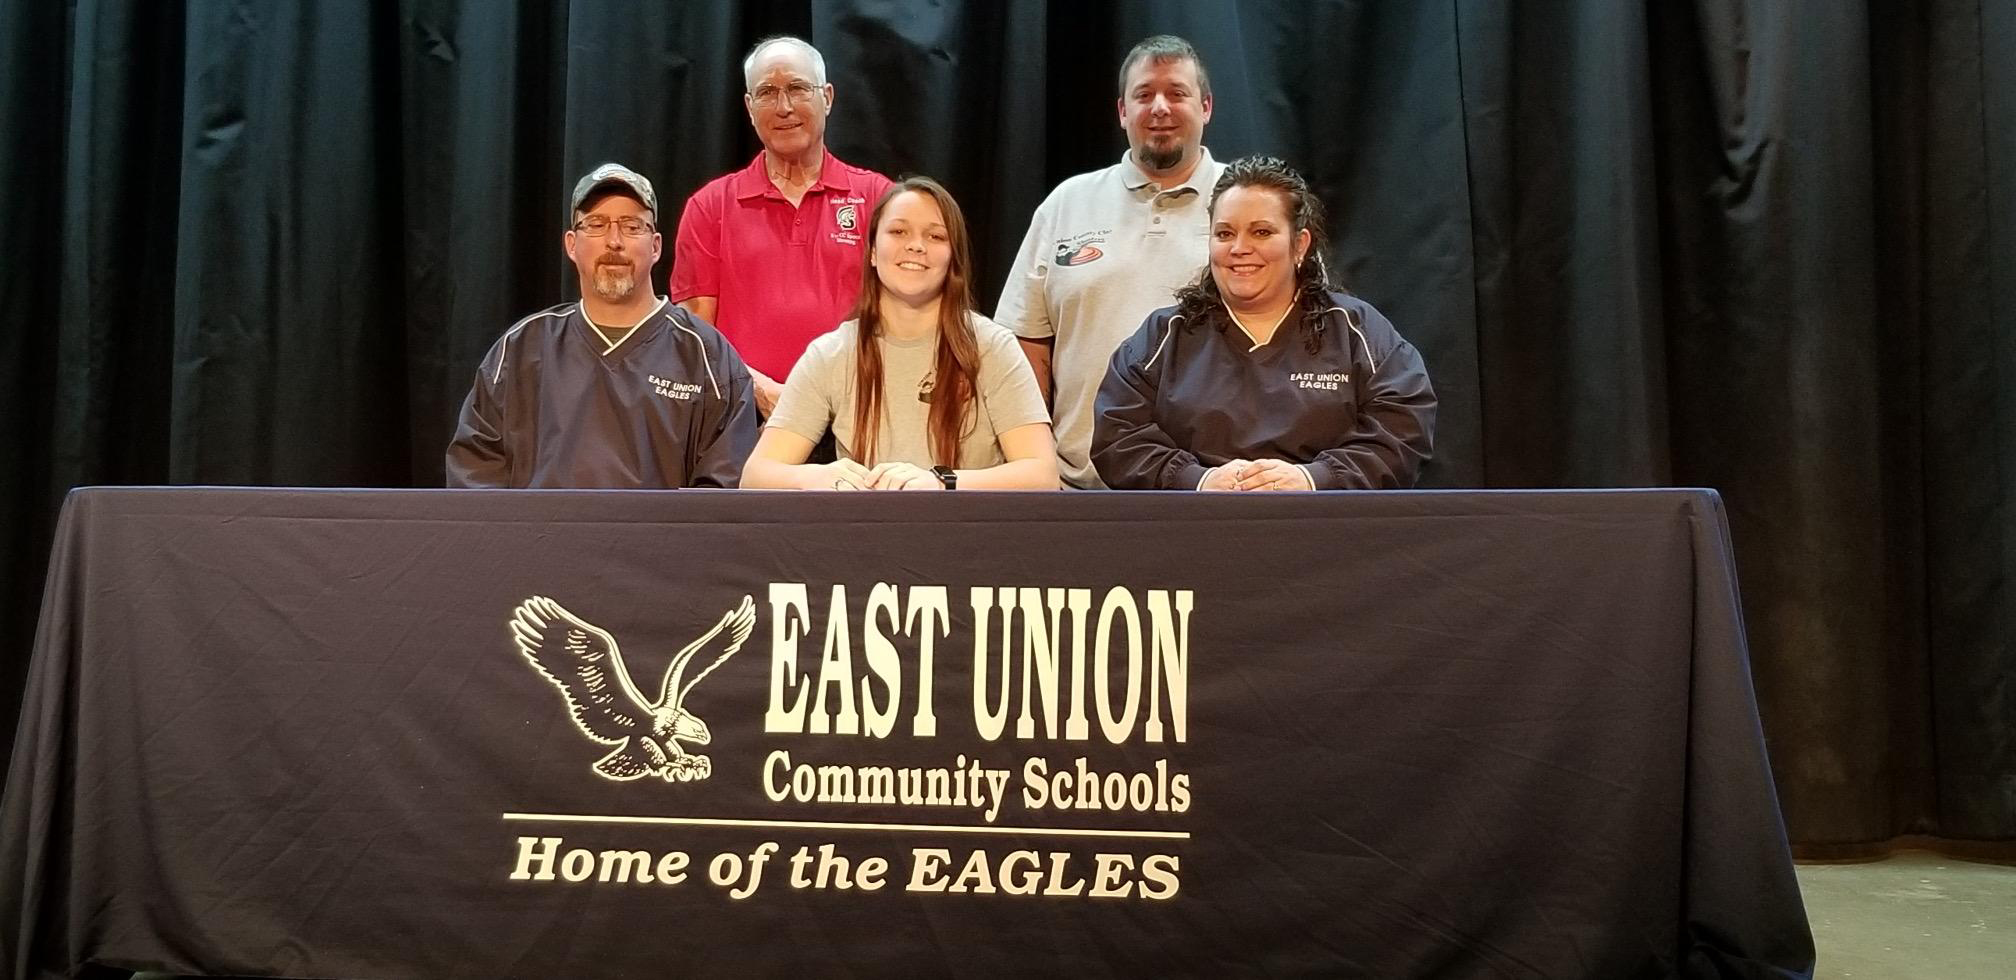 In front - Shawn Miller, Taylor's father; Taylor Miller; and Rosie Miller, Taylor's mother. In back - Marc Roberg, SWCC sports shooting coach; and Josh Purdy, East Union trap coach.